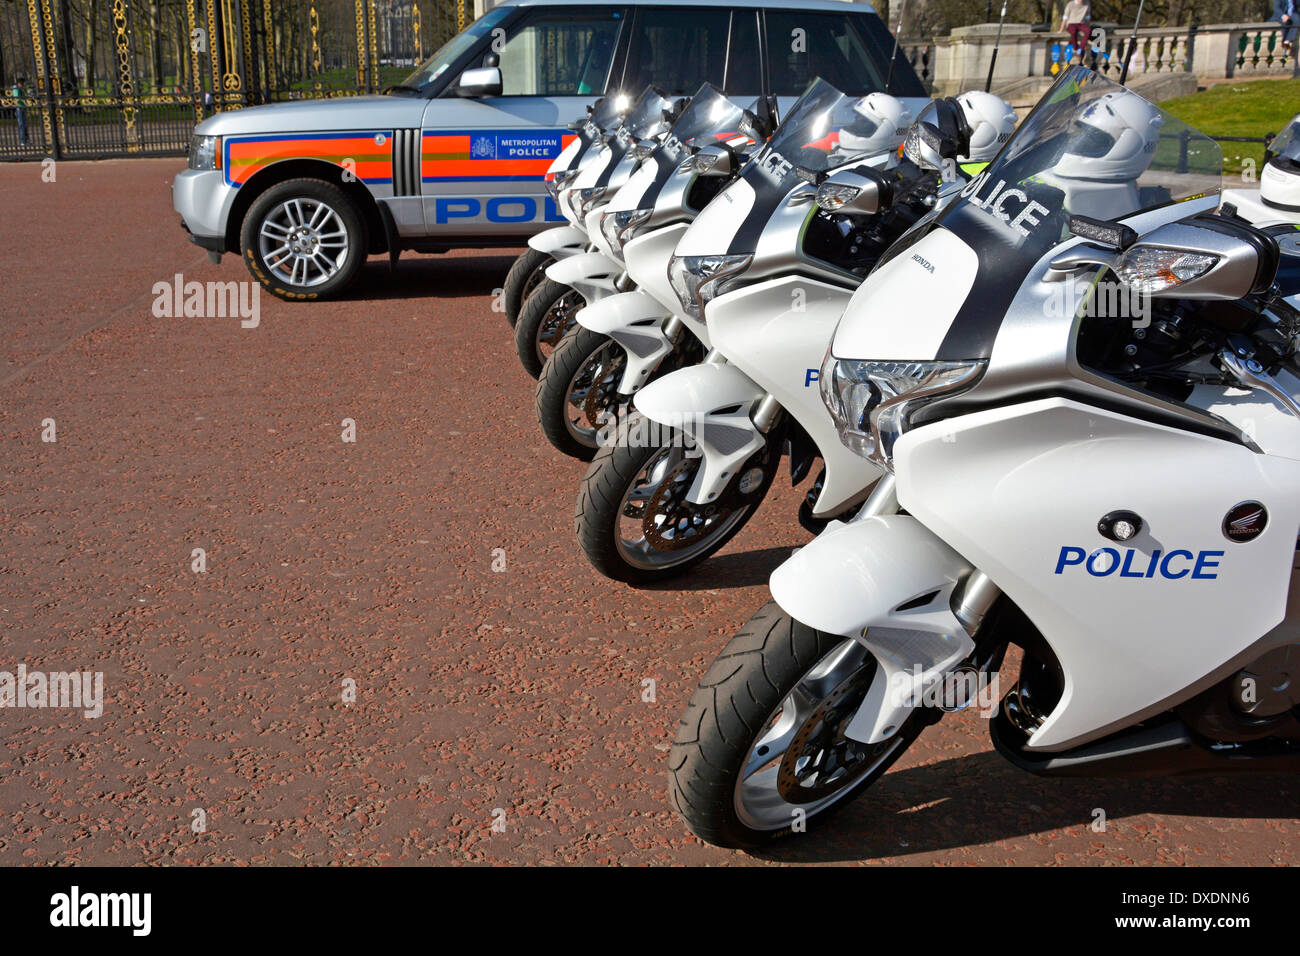 Metropolitan Police Honda motorbikes and car parked in the Mall London England UK Stock Photo